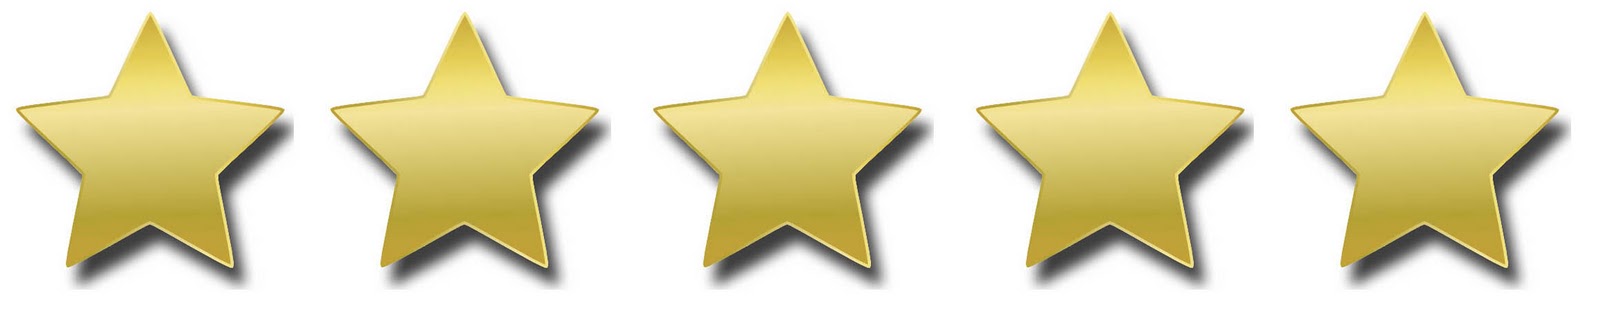 5 Gold Stars Png Image Clipart